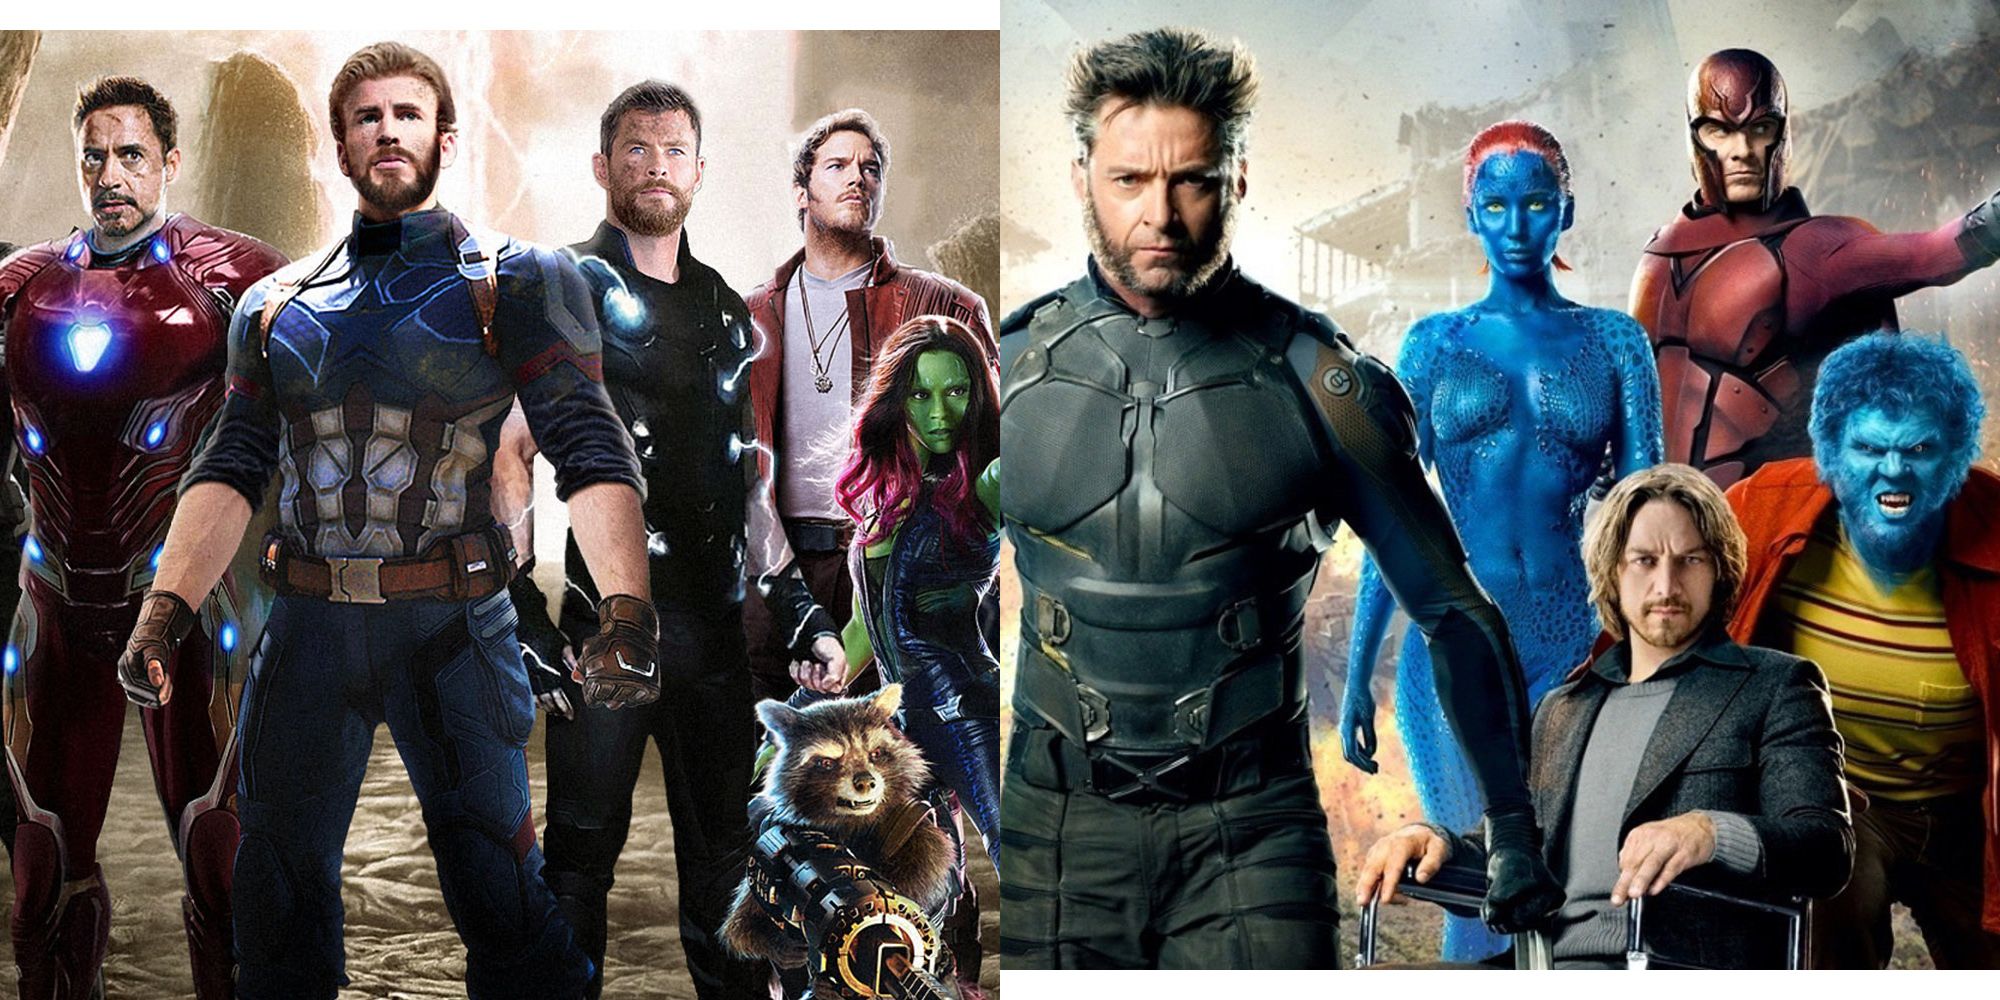 X Men Fantastic 4 Avengers 4 Fan Theory How Avengers 4 Will Introduce X Men Fantastic 4 Into The Marvel Cinematic Universe